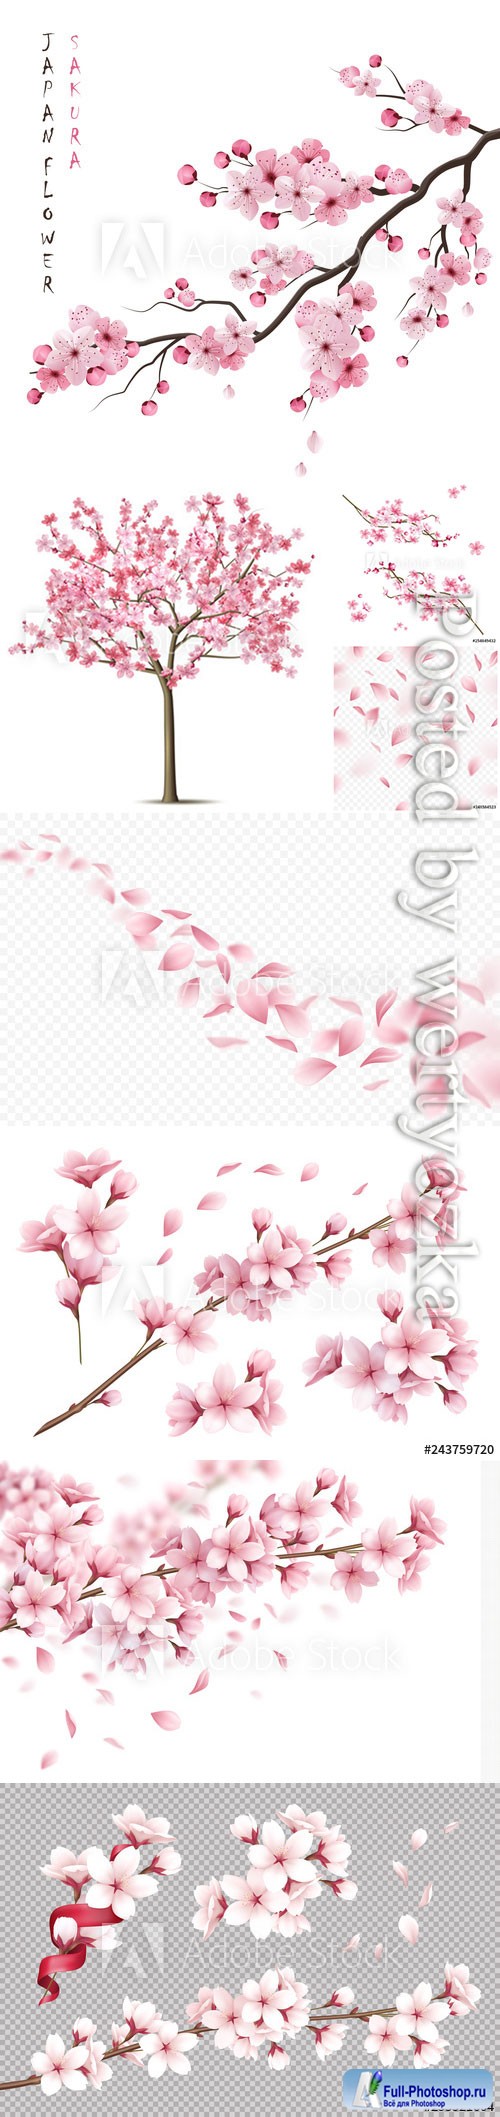 Cherry flowers background vector illustrations